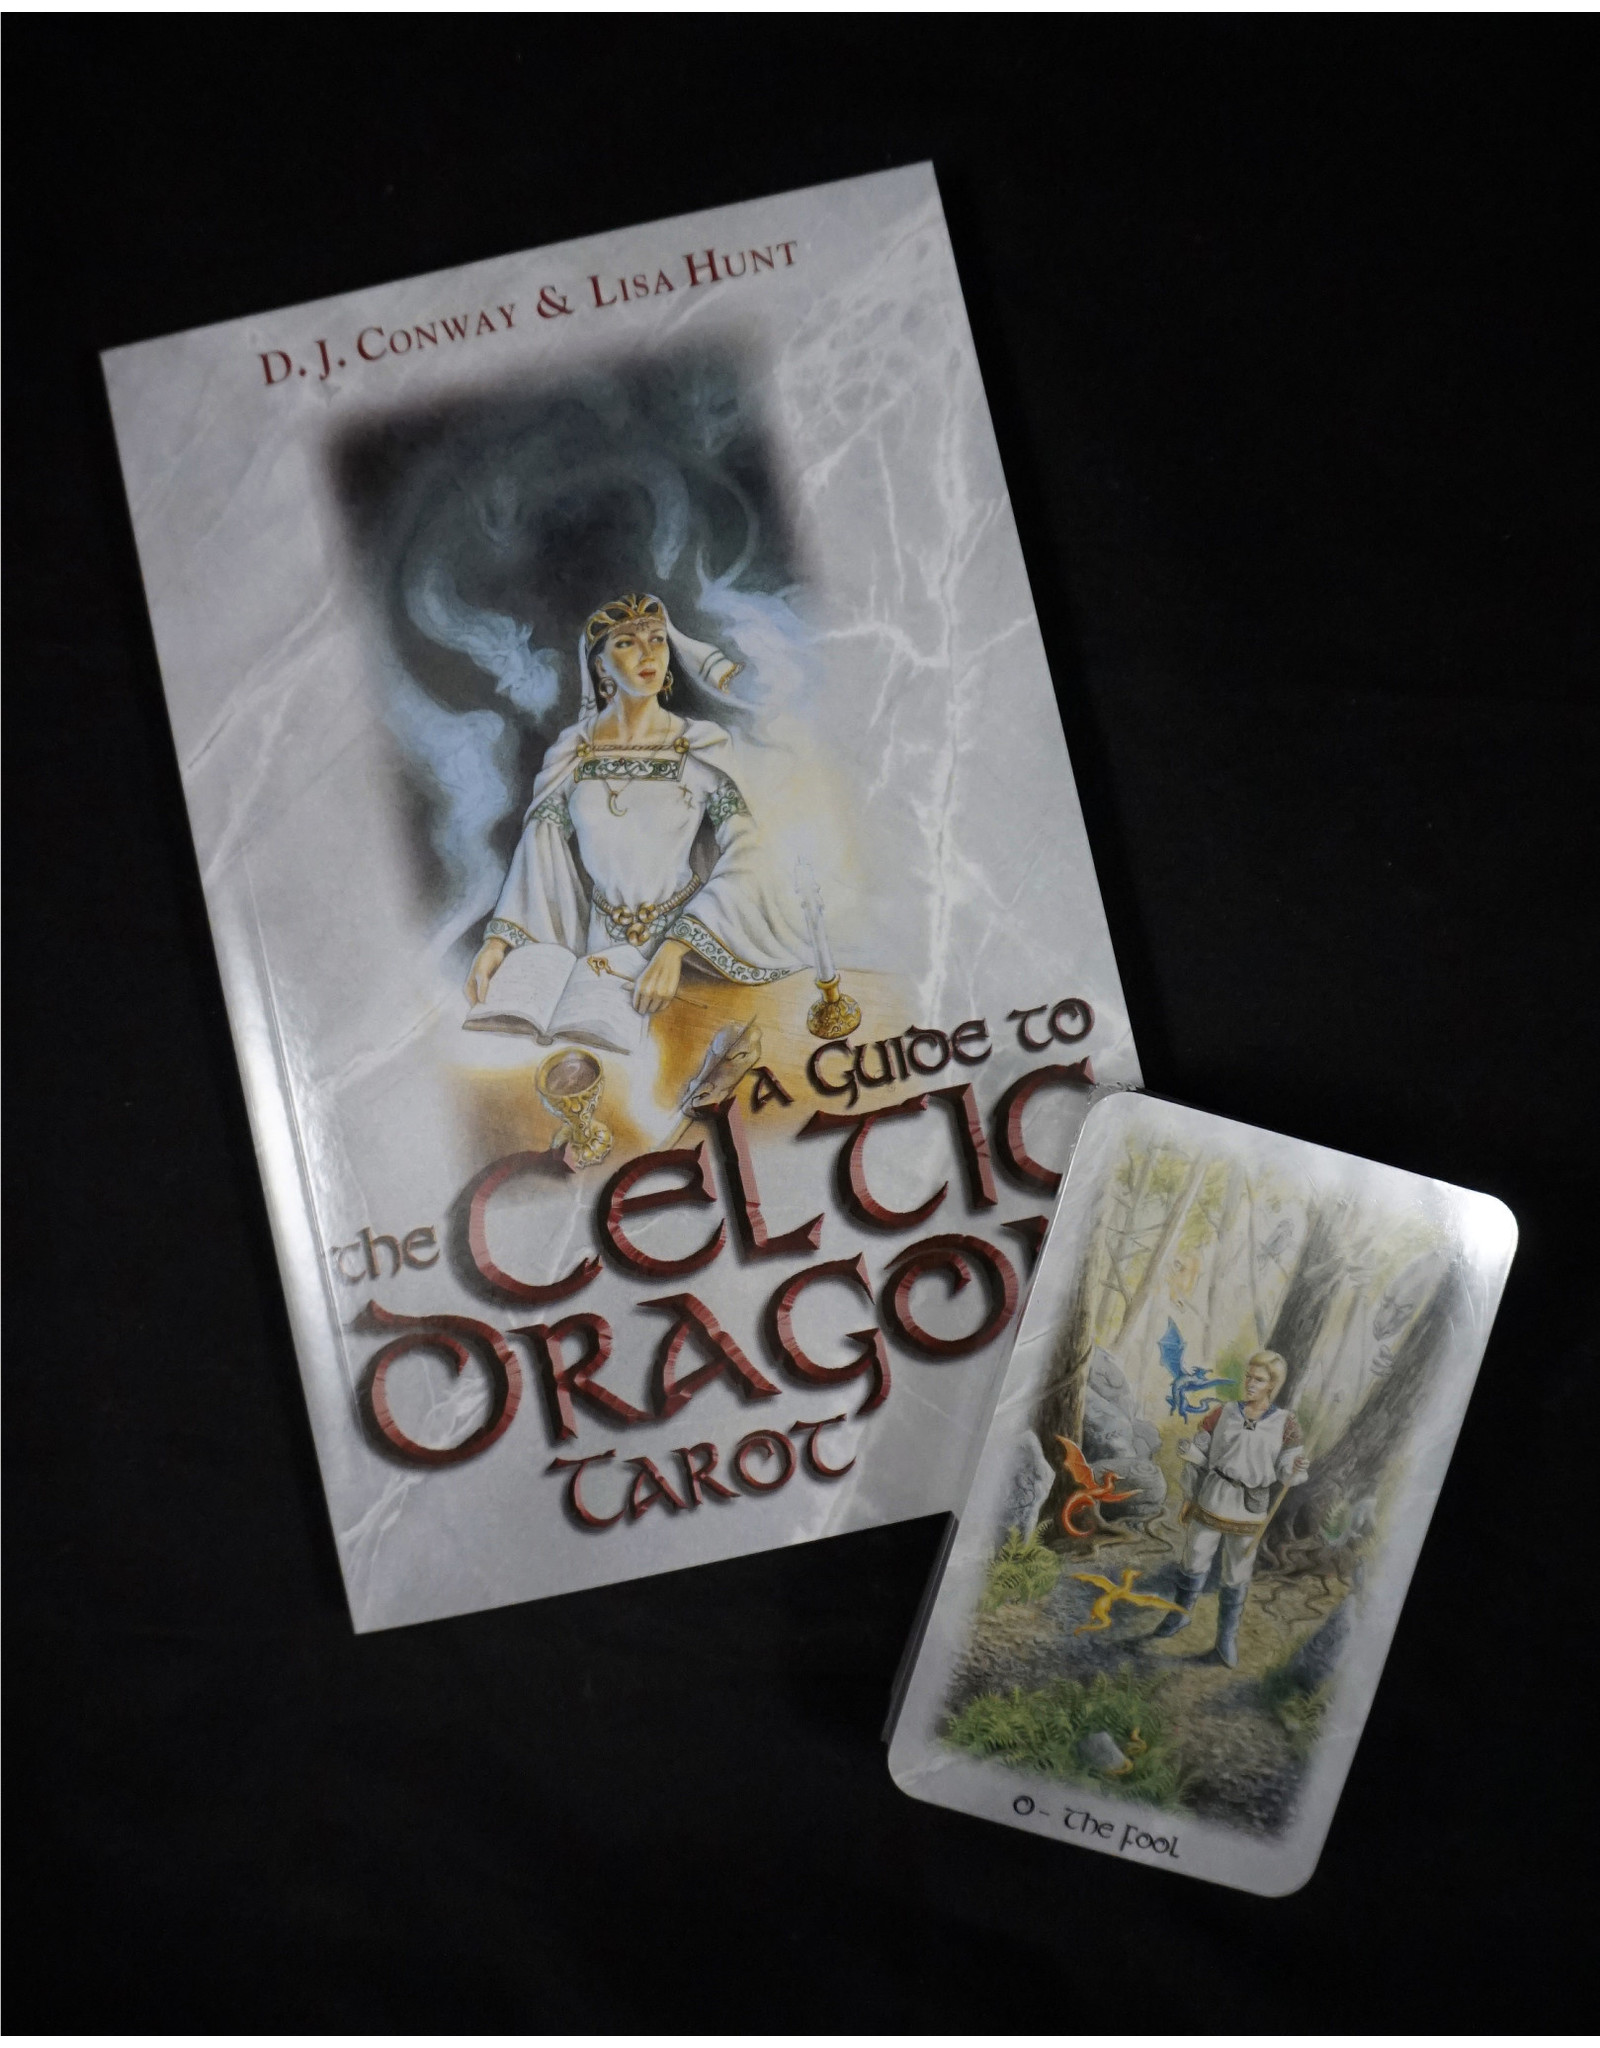 The Celtic Dragon Tarot Kit by D.J. Conway